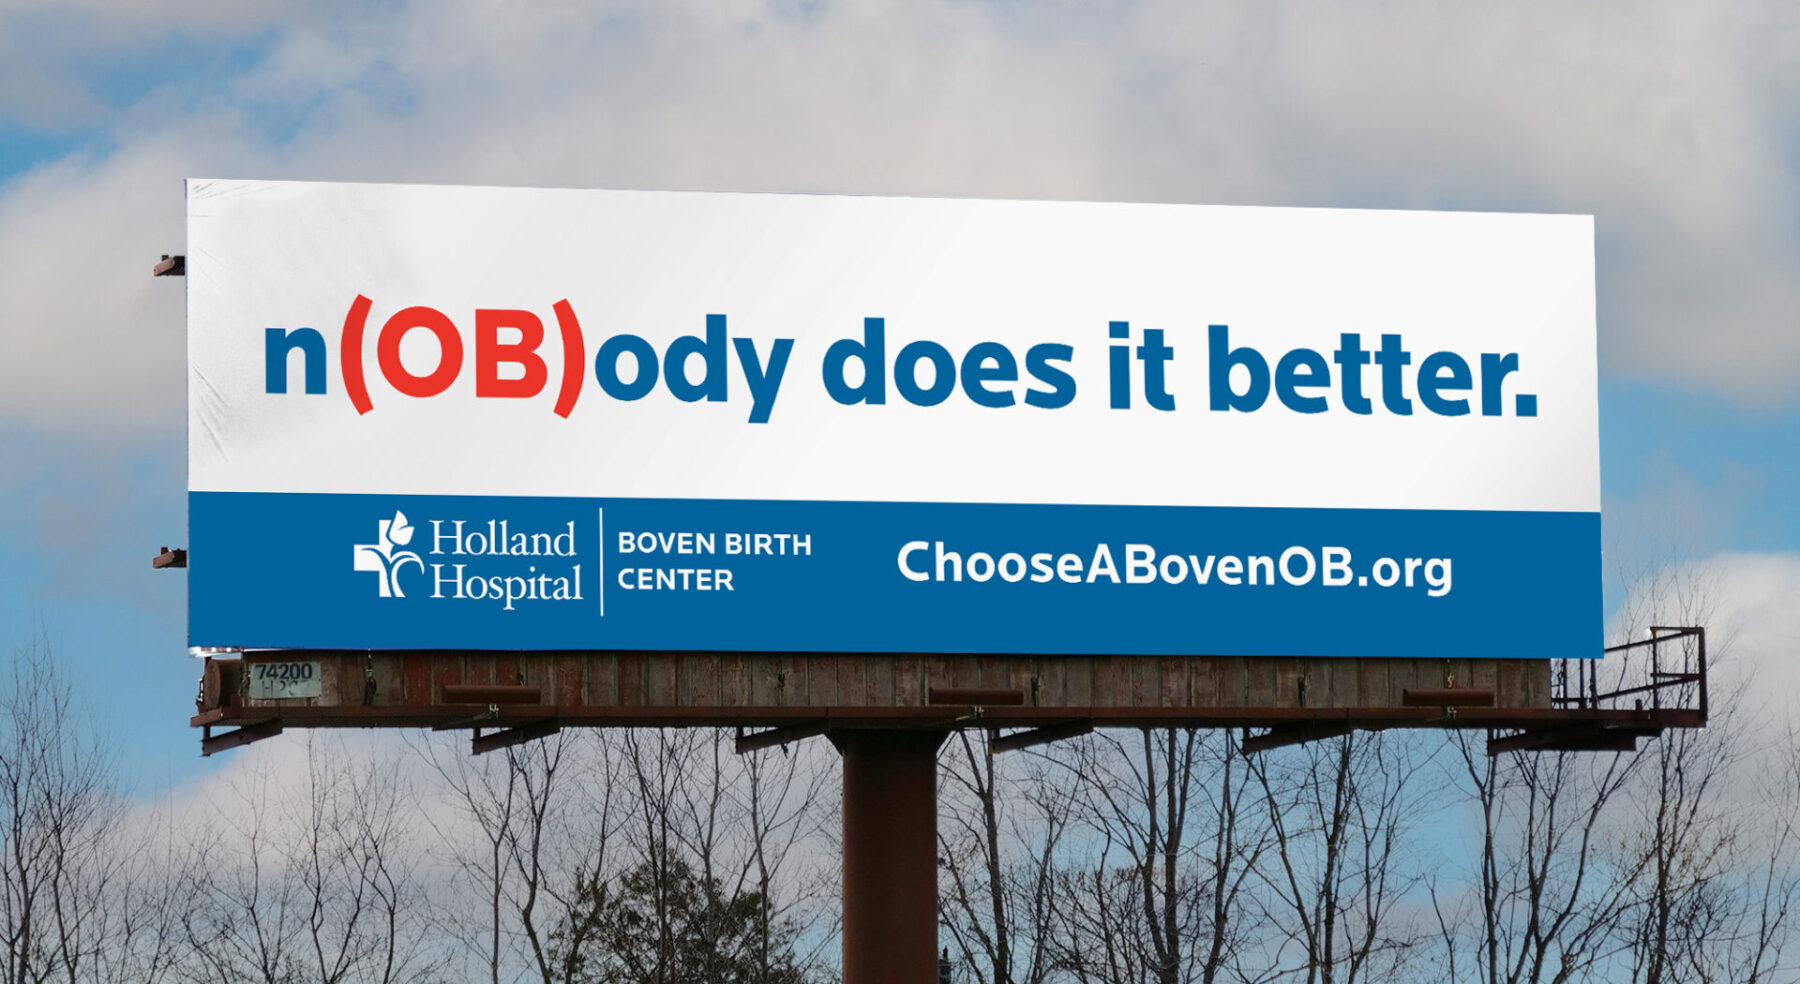 Out of home bulletin with headline "Nobody does it better" with OB called out visually